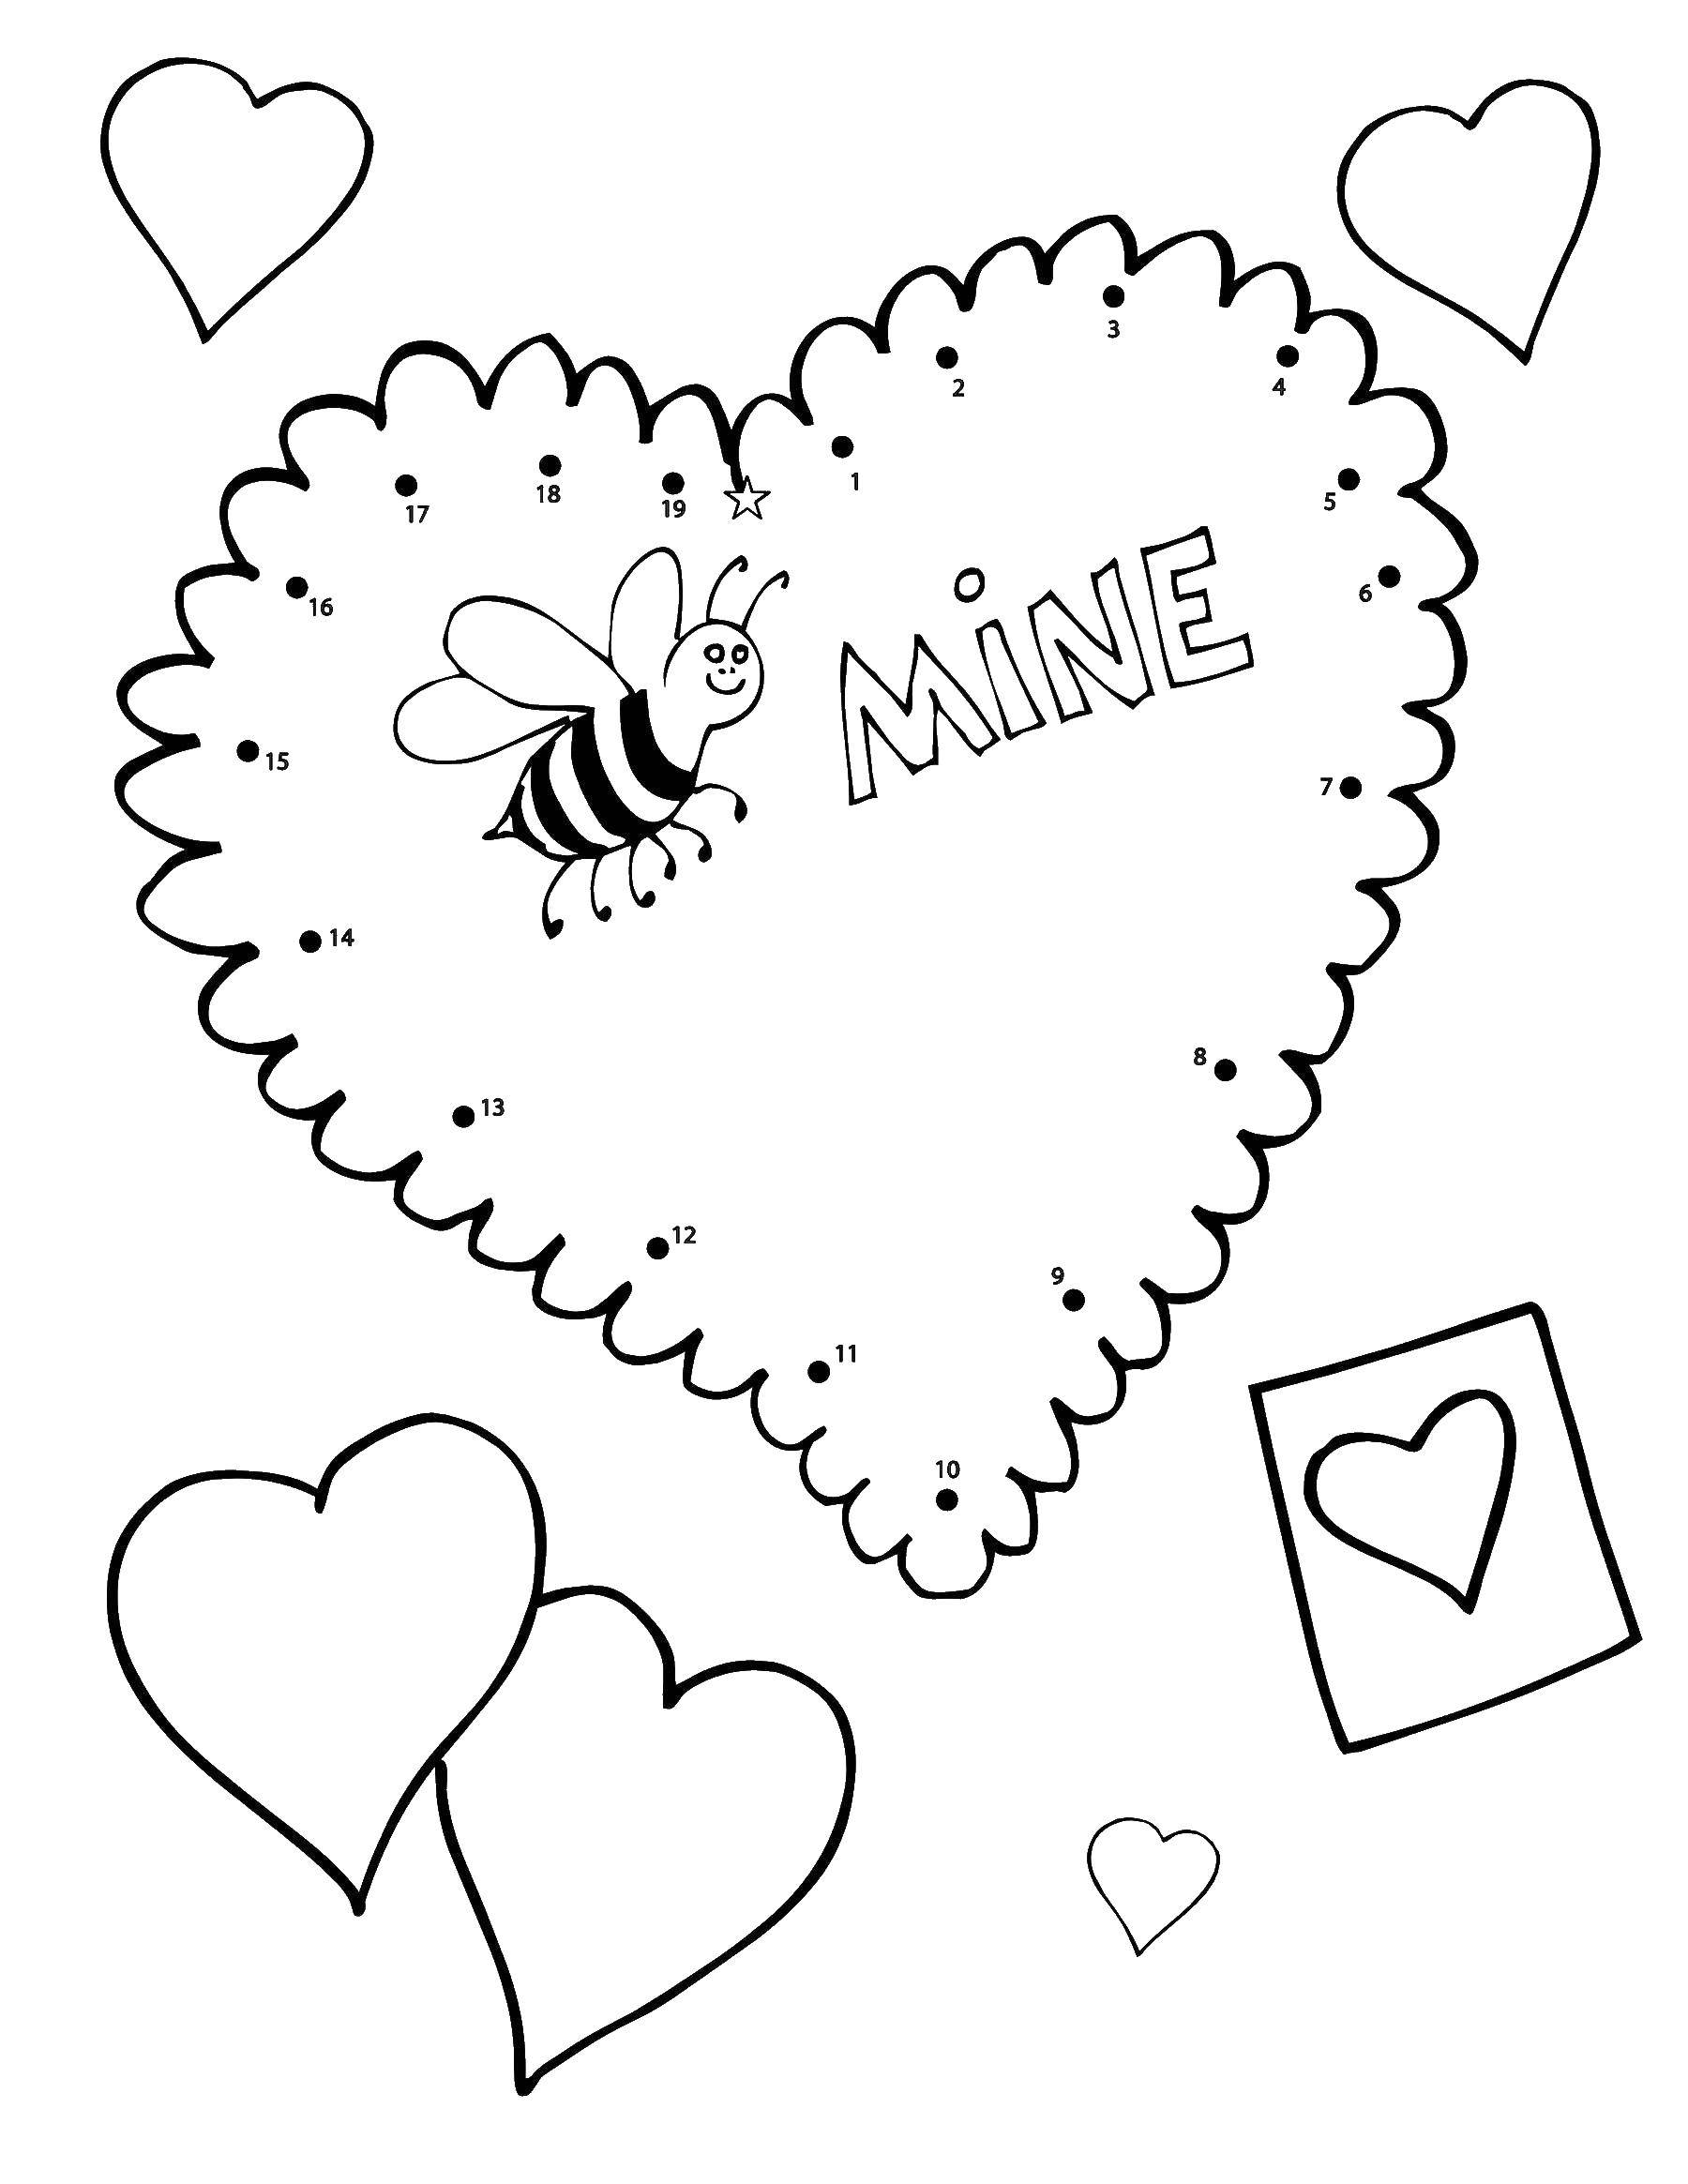 Coloring Heart bee. Category Valentines day. Tags:  heart, bee, card.